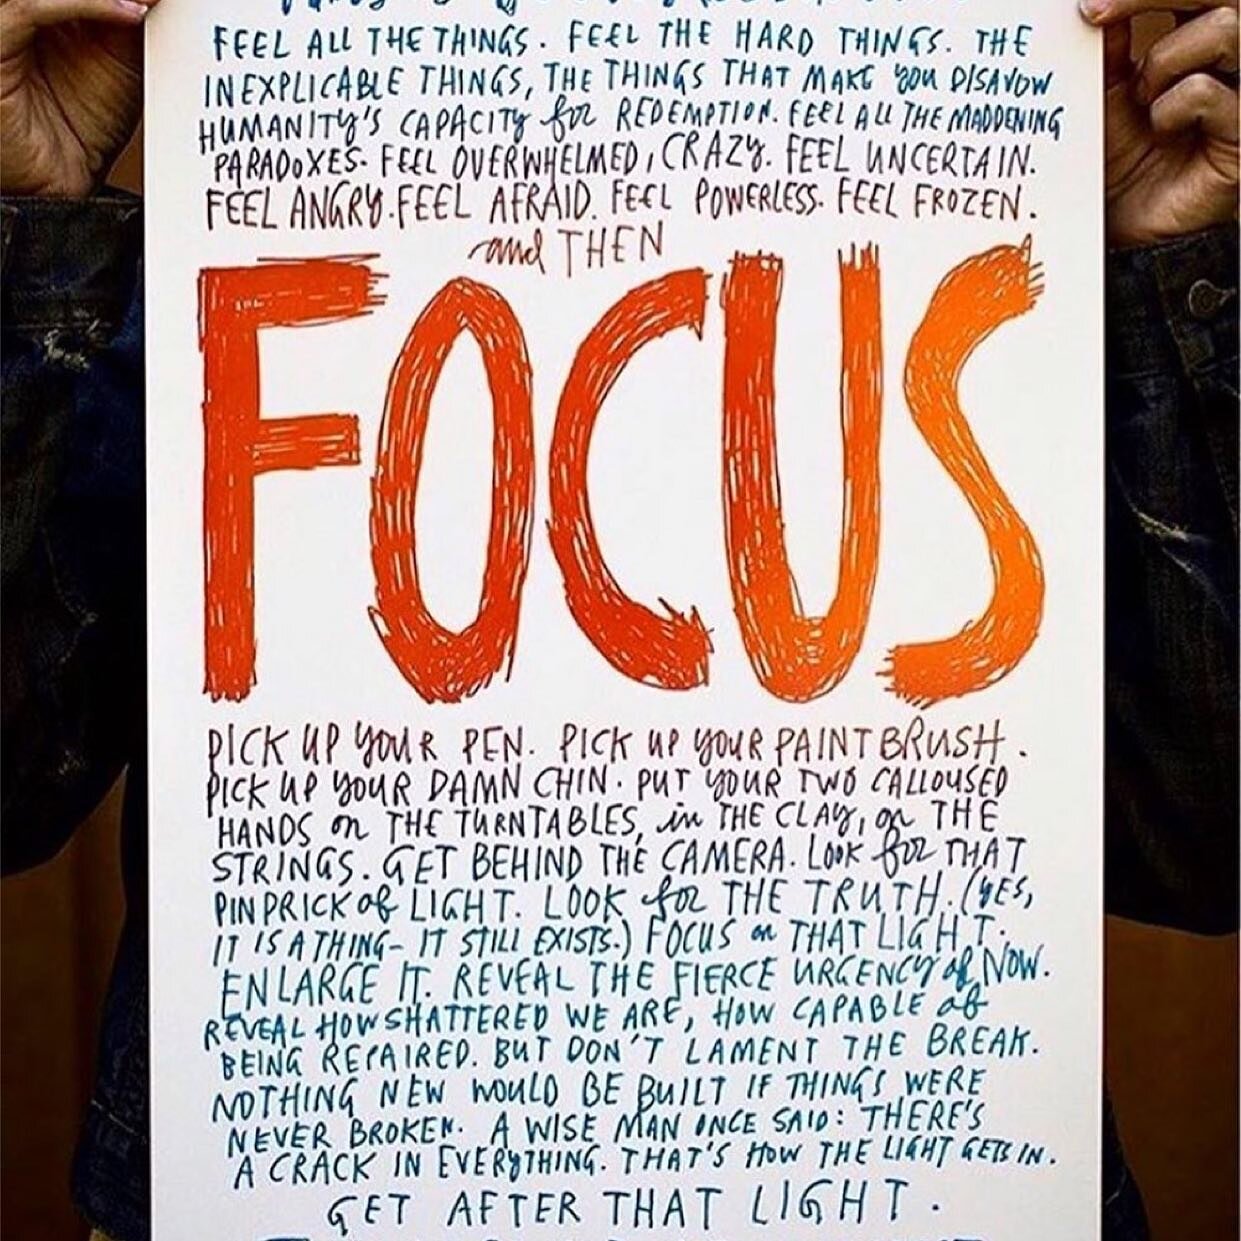 Thanks for the reminder @wendymac. Let us not wallow in despair. Focus and let&rsquo;s get our fight on &mdash;- in the streets fist raised in protest, at the ballot box, knocking, texting, phone banking to get out the vote, on the canvas, through po